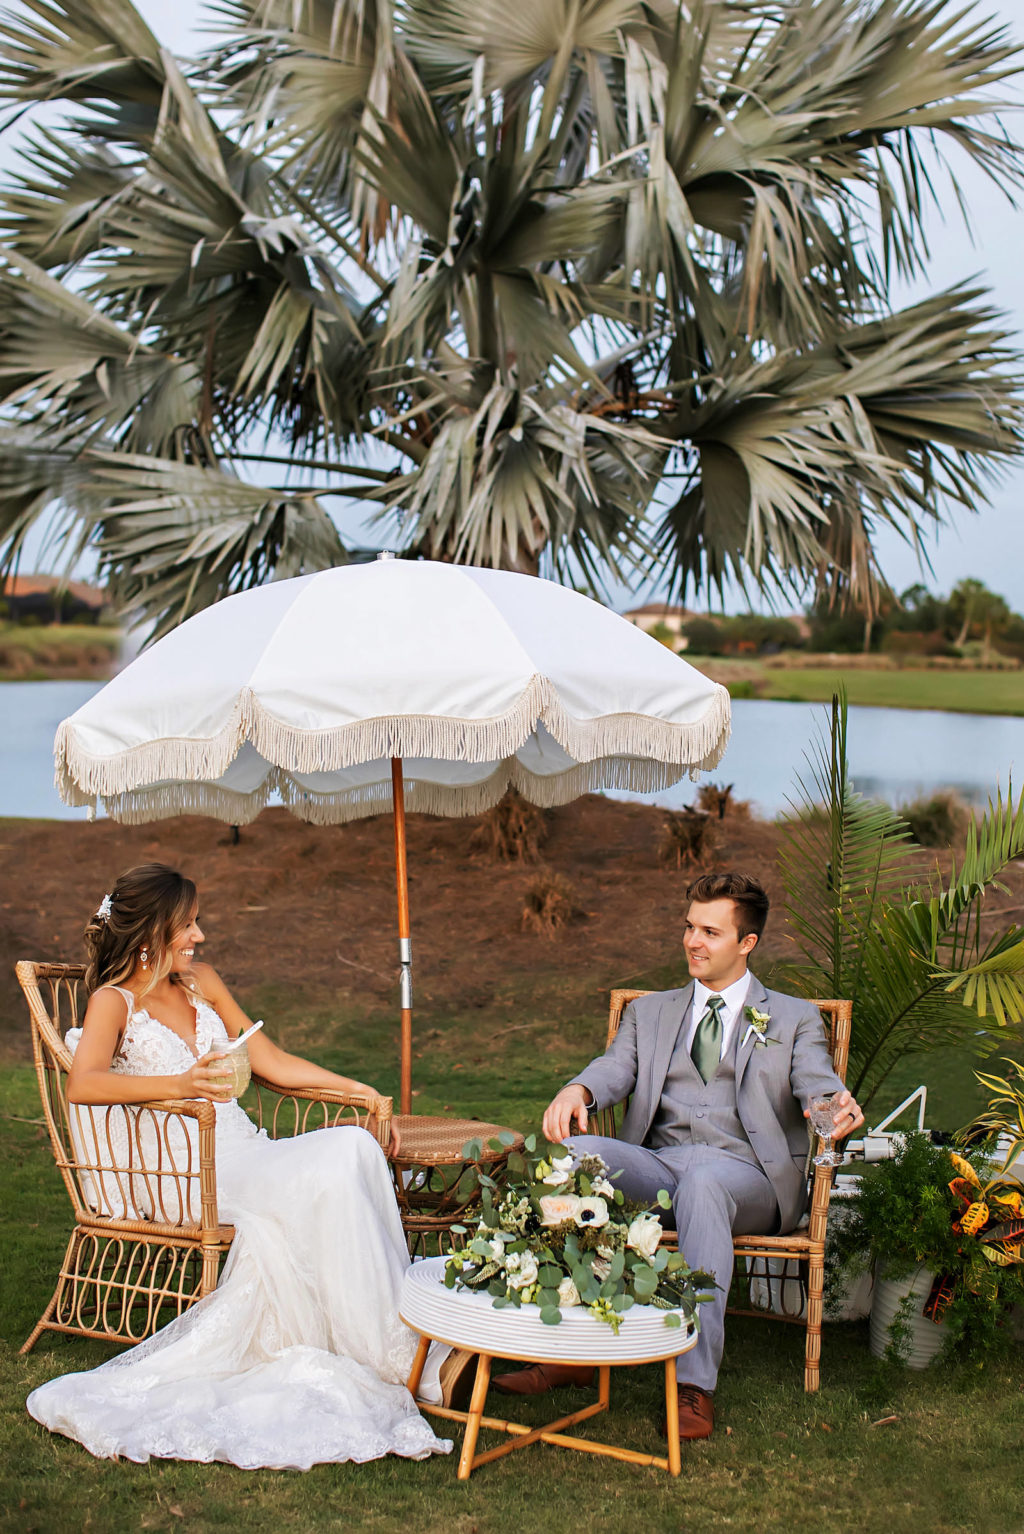 Florida Bride and Groom Sitting Outside During Wedding Reception on Bamboo Lounge Chairs, White Umbrella, Greenery and White Anemone Floral Bouquet | Tampa Bay Wedding Photographer Limelight Photography | Wedding Planner MDP Events | Wedding Dress Truly Forever Bridal Sarasota | Wedding Venue Esplanade Country Club | Wedding Florist Beneva Florals | Styled Shoot